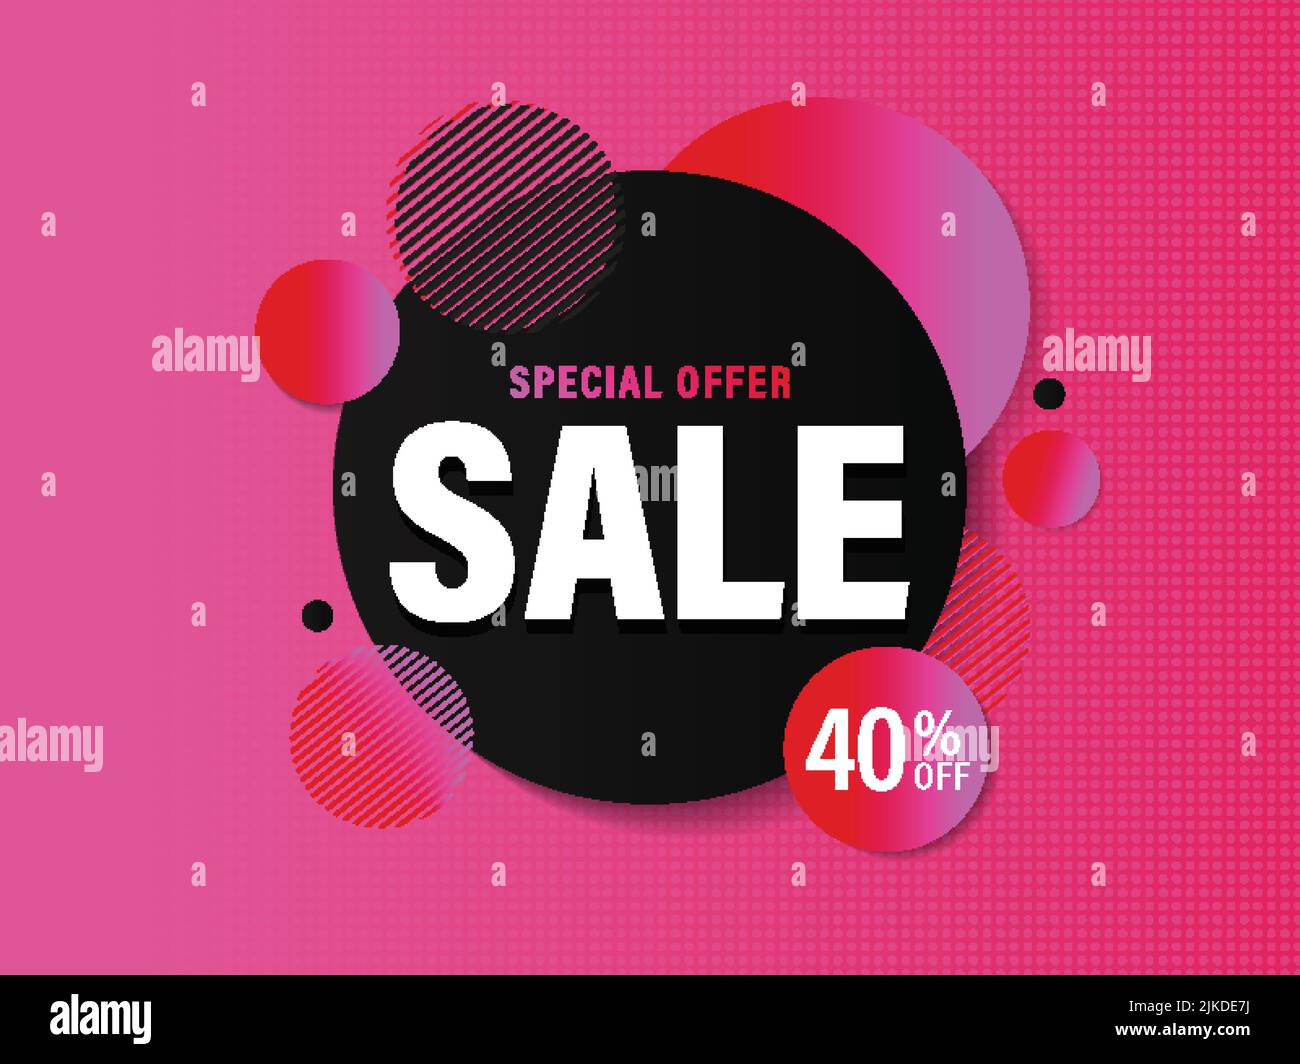 Abstract Sale Poster Design With 40% Discount Offer On Black And Pink Dotted Background. Stock Vector